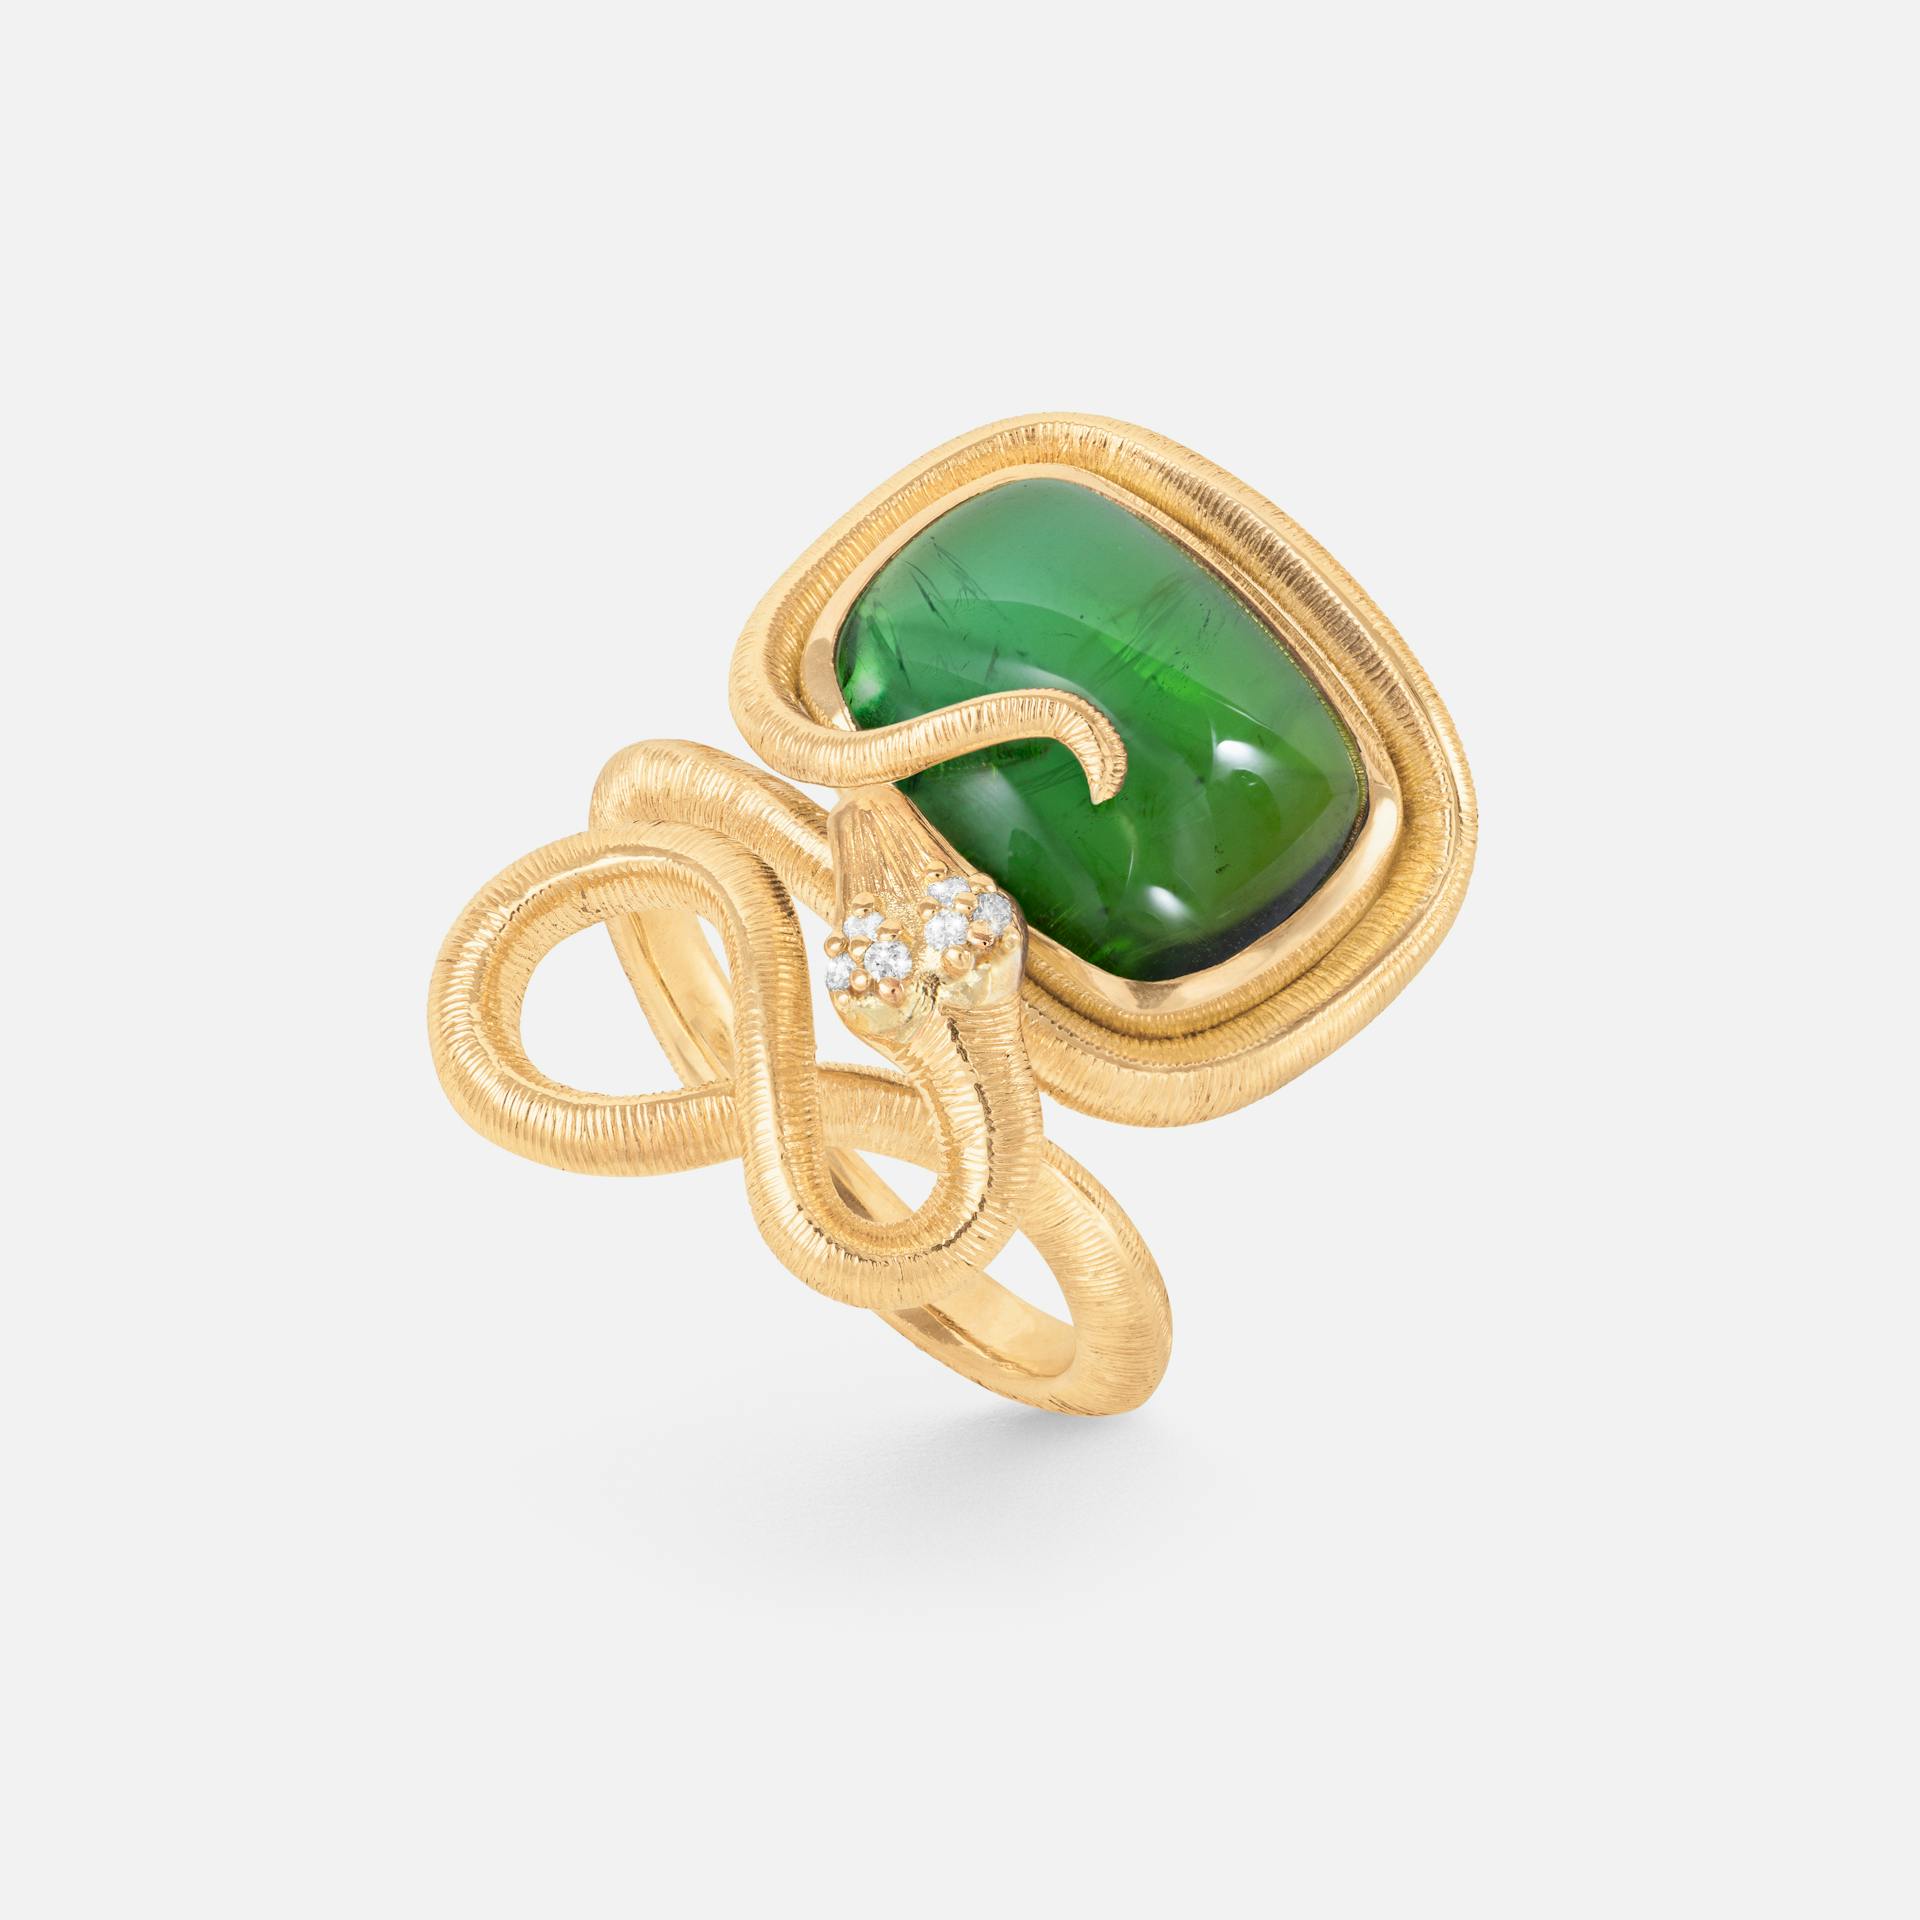 Snakes Ring in Yellow Gold with Green Tourmaline and Diamonds  |  Ole Lynggaard Copenhagen 